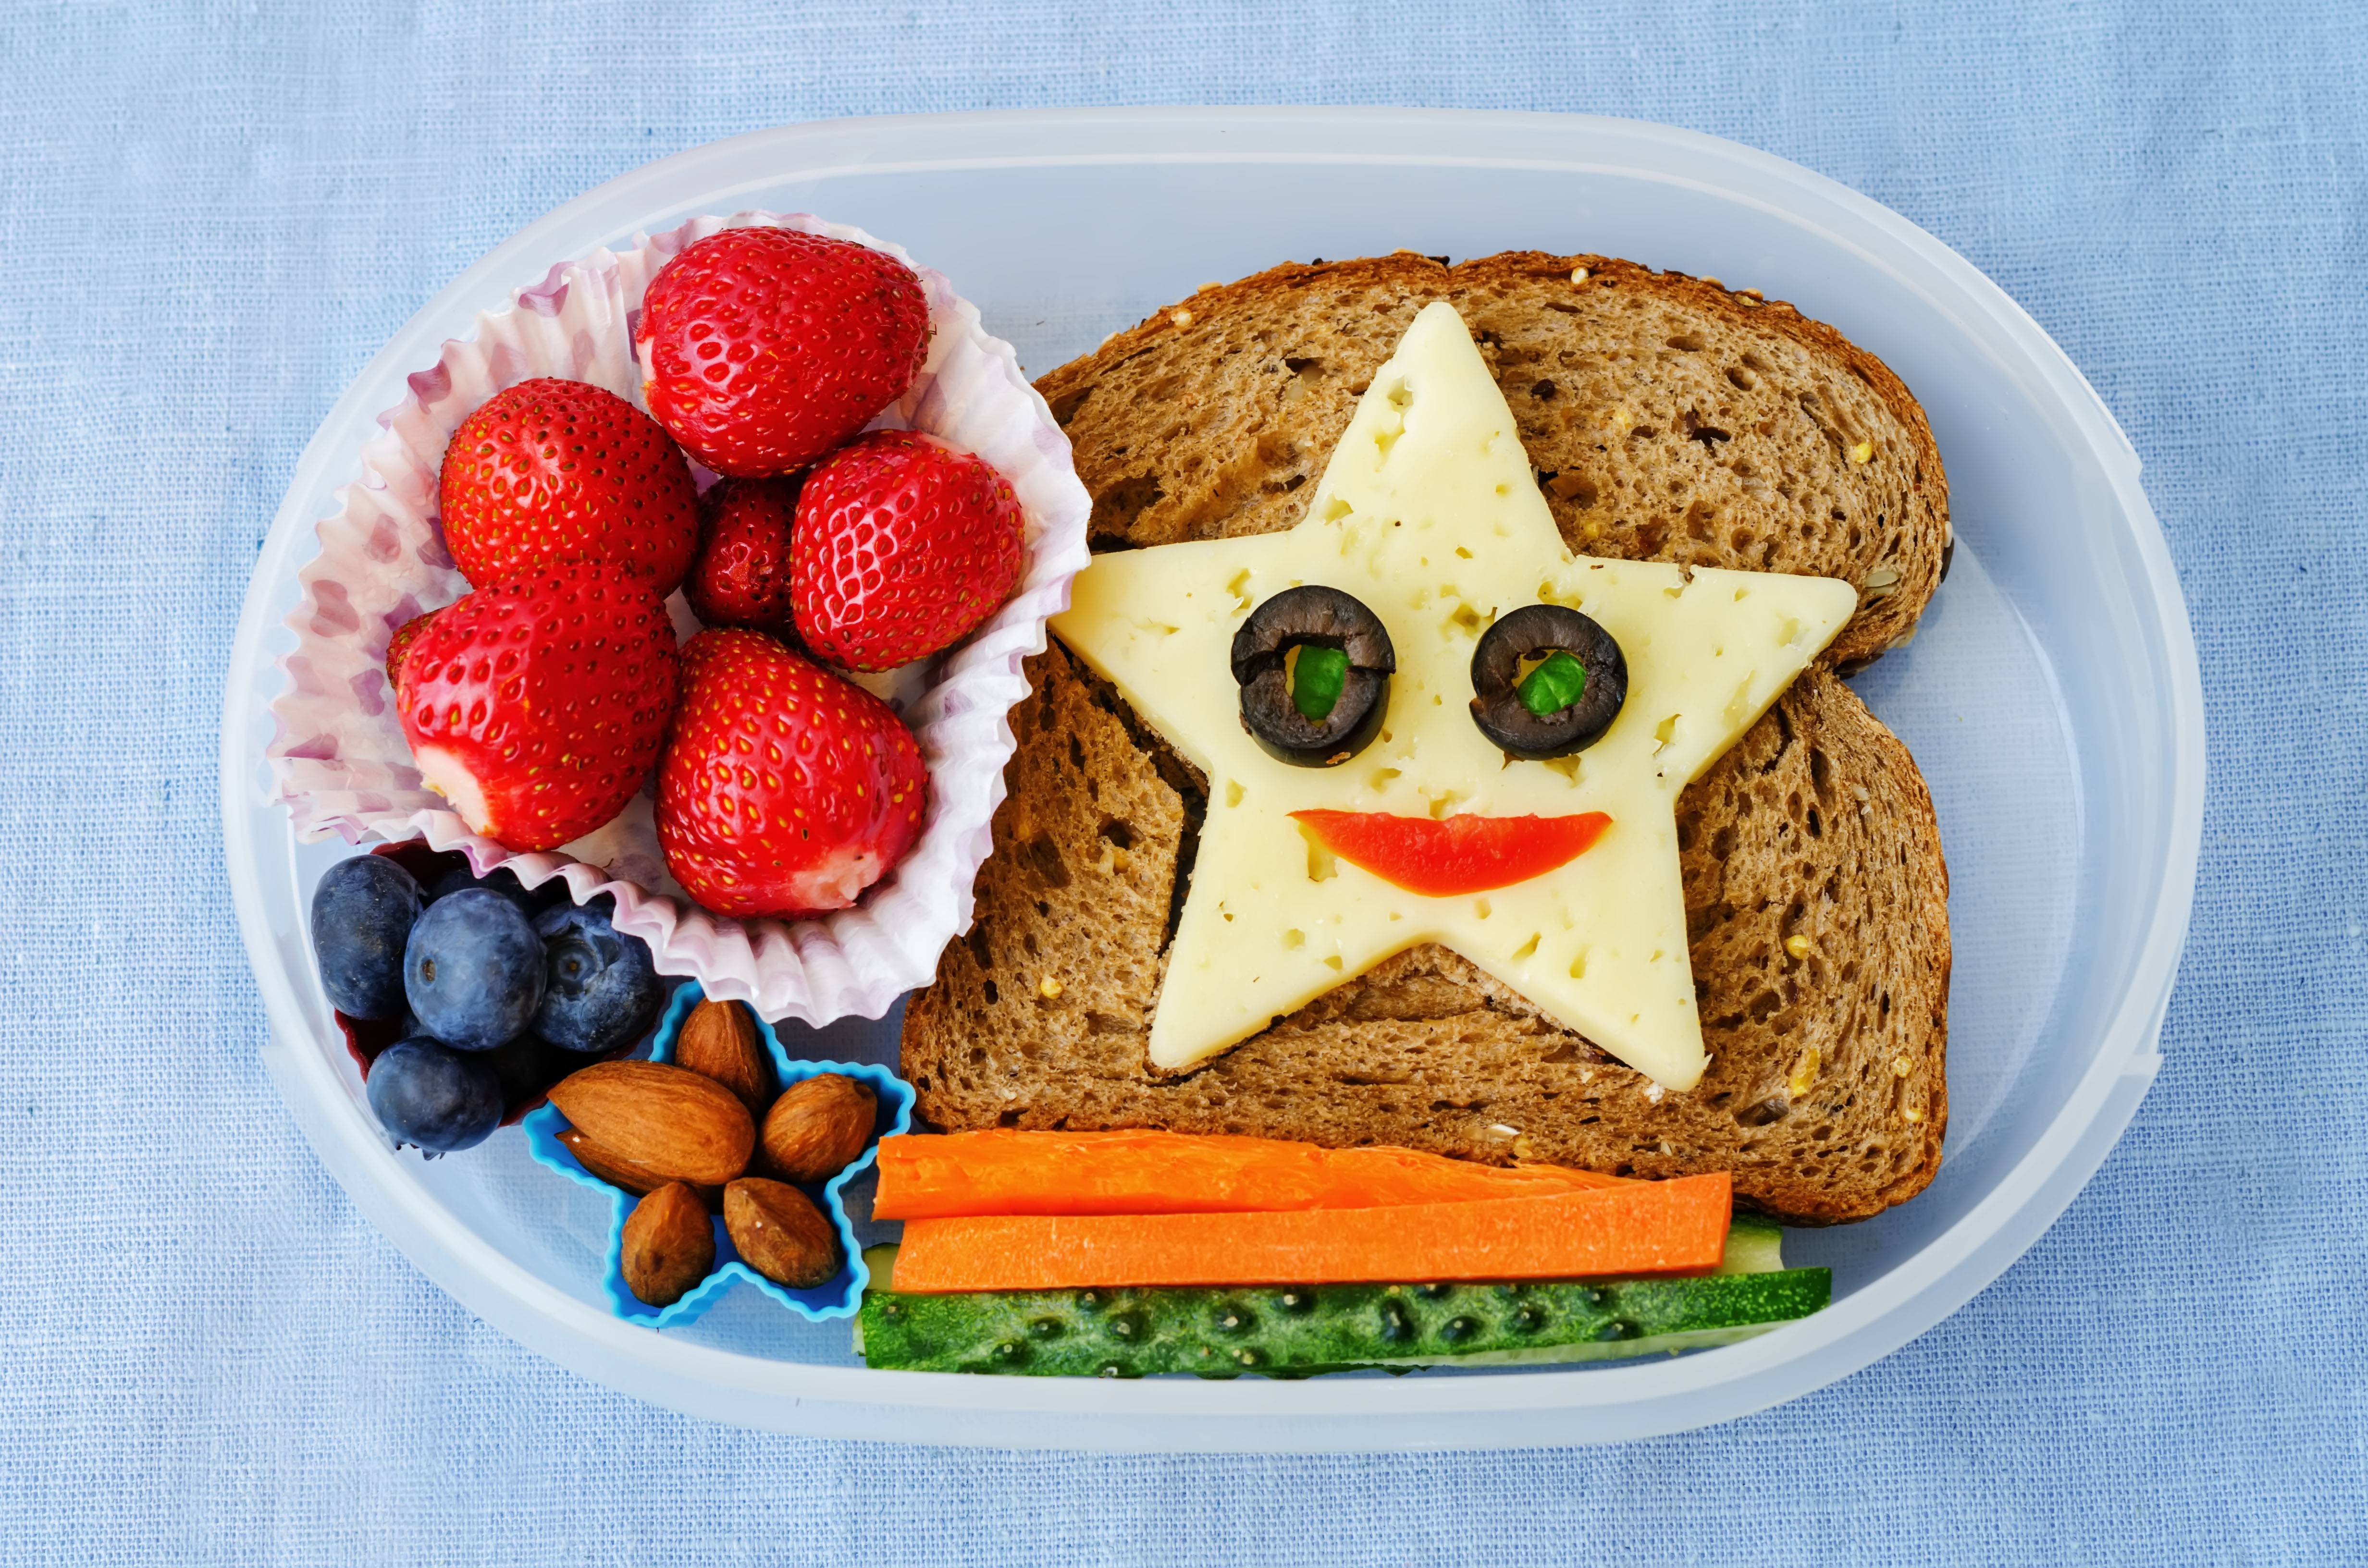 Pack Healthy Lunches For Your Kids